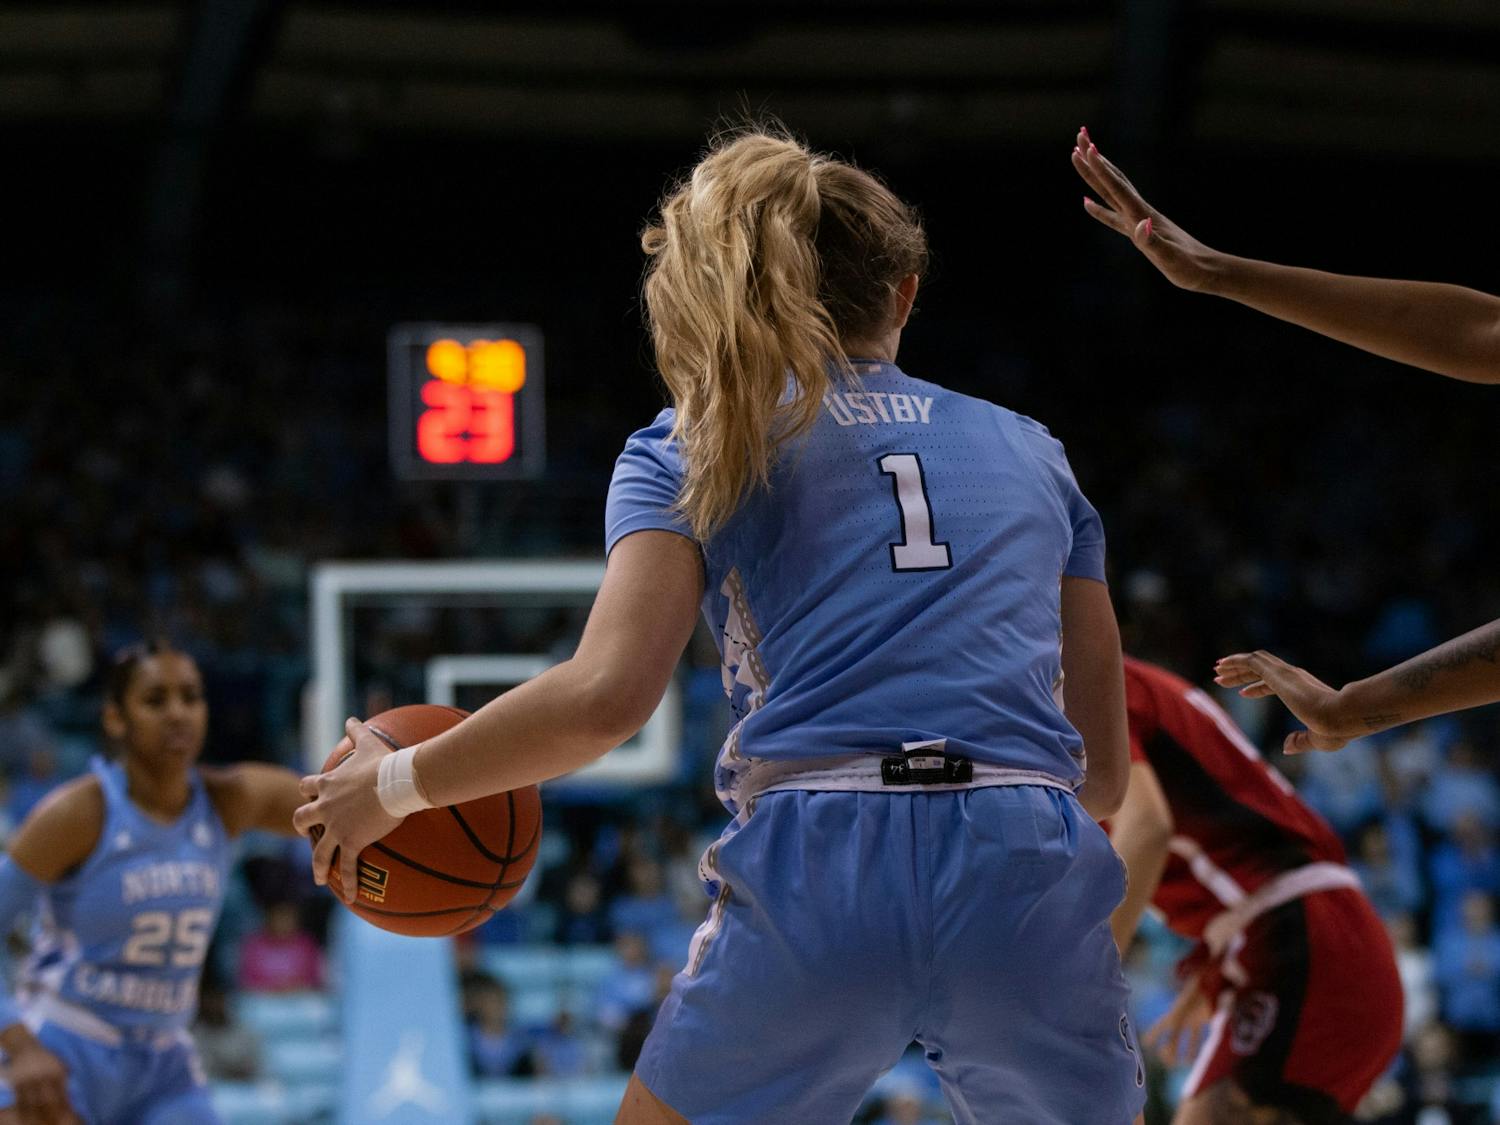 UNC junior guard/forward Alyssa Ustby (1) dribbling the ball during the women's basketball game against the NC State Wolfpack in Carmichael Arena on Sunday, Jan. 15, 2023. The Tar Heels won 56-47.